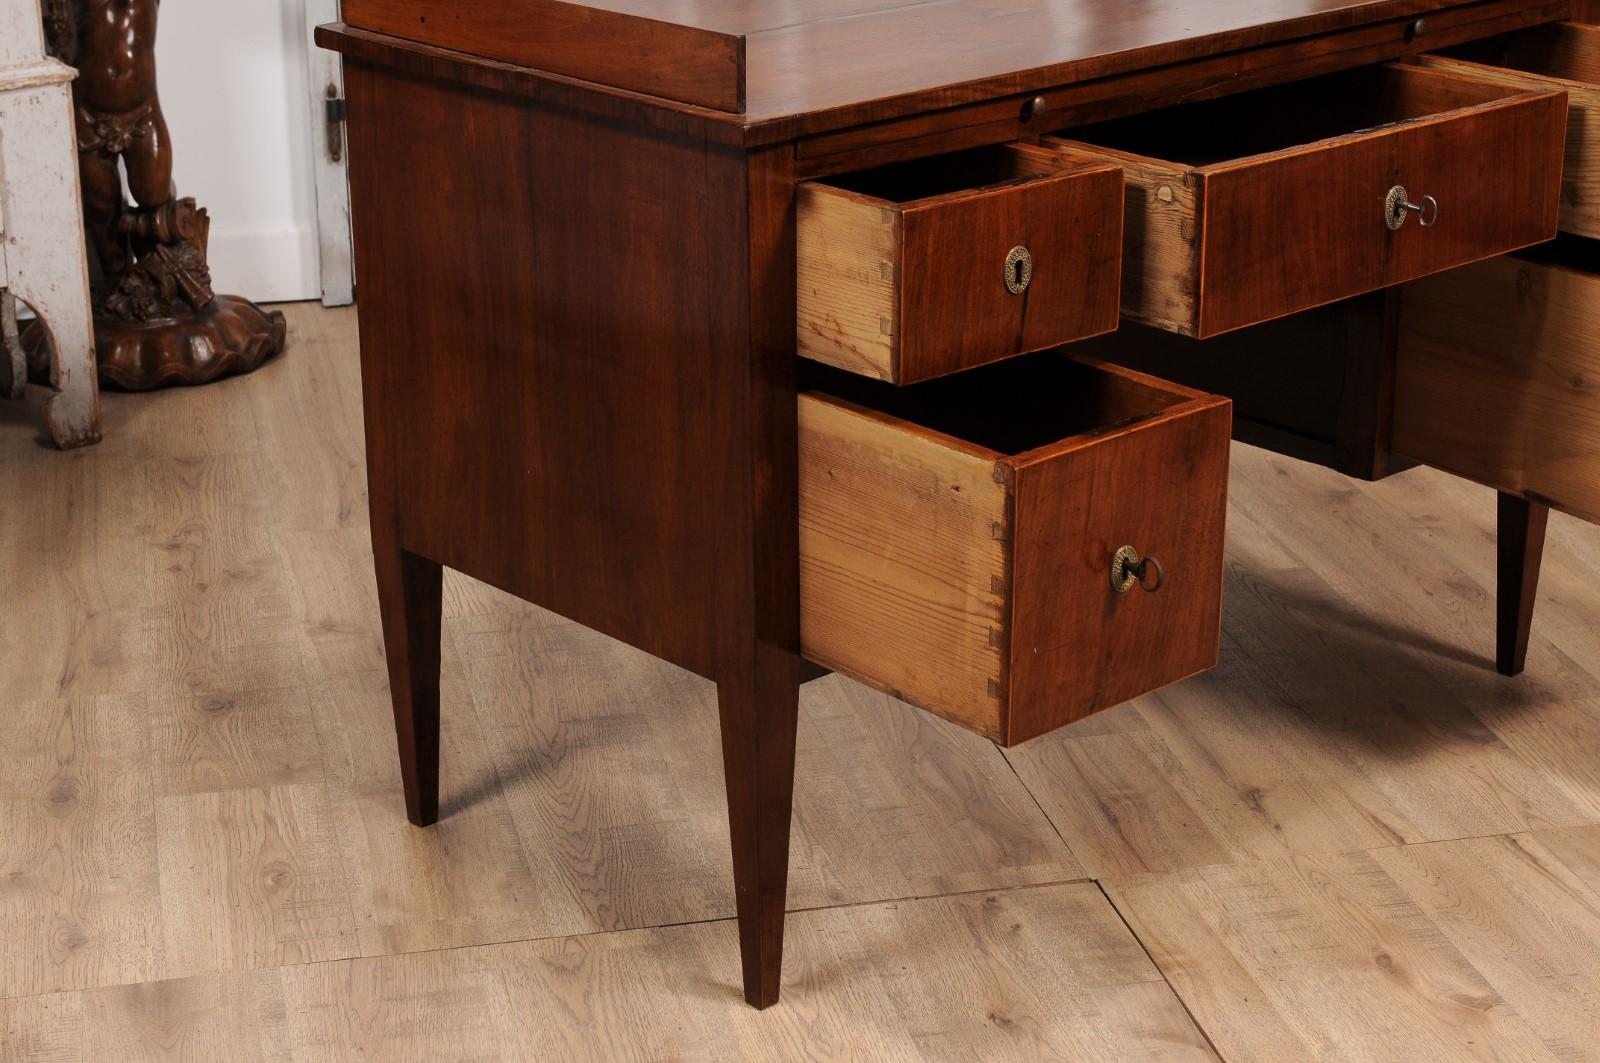 Italian 1820s Walnut and Mahogany Desk with Five Drawers, Pull-out and Banding For Sale 8